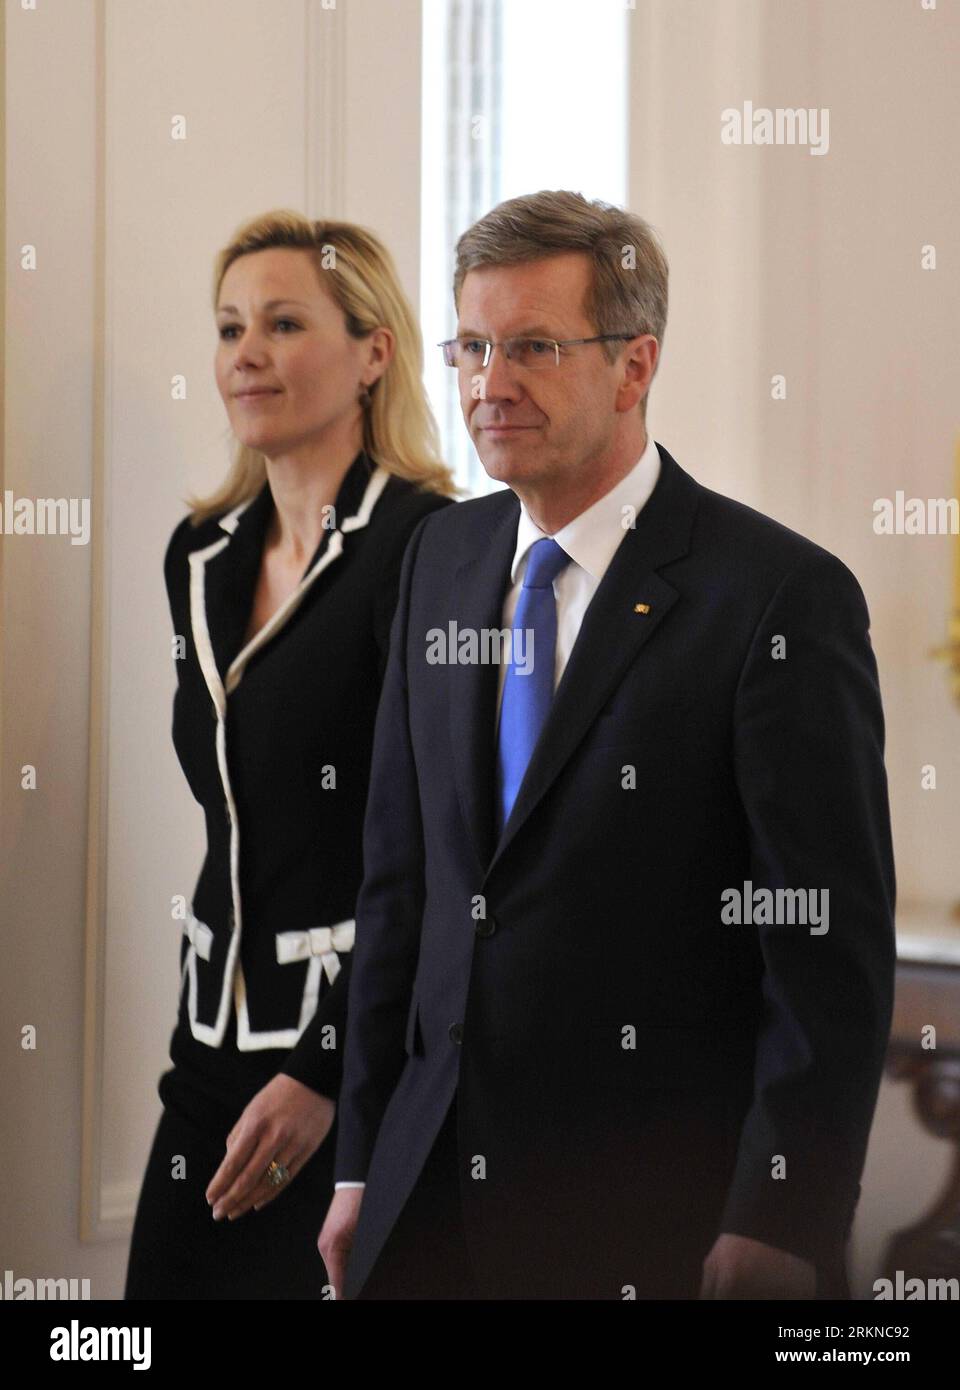 (120217) -- BERLIN, Feb. 17, 2012 (Xinhua) -- German President Christian Wulff (L) and his wife Bettina arrive for making a statement of resignation in the presidential residence in Berlin, Feb. 17, 2012. (Xinhua/Ma Ning) GERMANY-PRESIDENT-RESIGNATION PUBLICATIONxNOTxINxCHN   120217 Berlin Feb 17 2012 XINHUA German President Christian Wulff l and His wife Bettina Arrive for Making a Statement of Resignation in The Presidential Residence in Berlin Feb 17 2012 XINHUA MA Ning Germany President Resignation PUBLICATIONxNOTxINxCHN Stock Photo